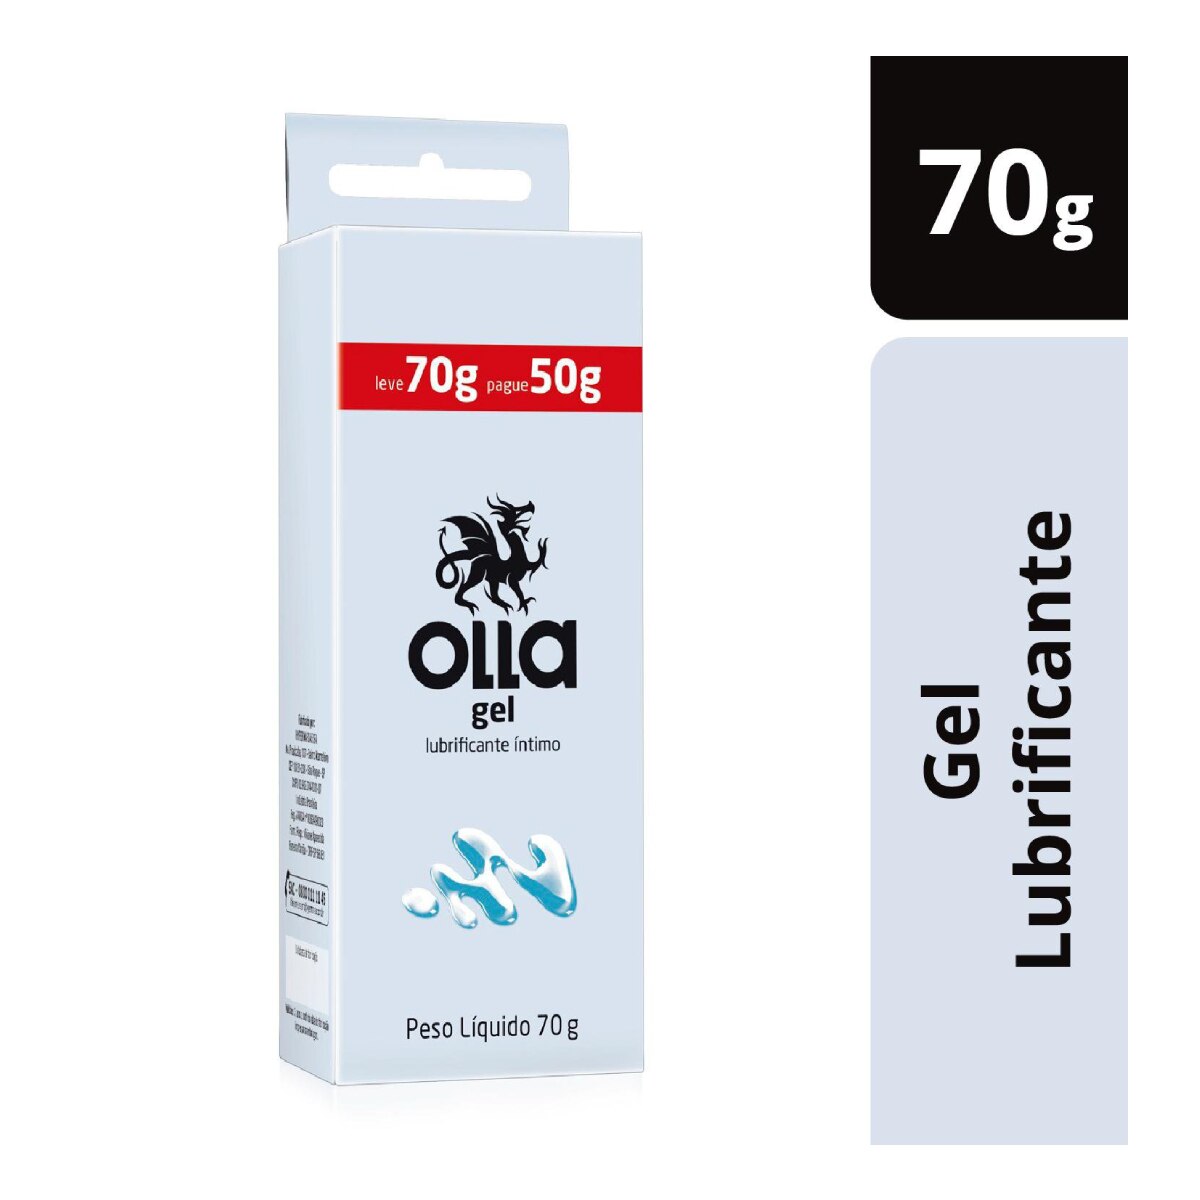 Gel Lubrificante Intimo Olla Leve 70g Pague 50g